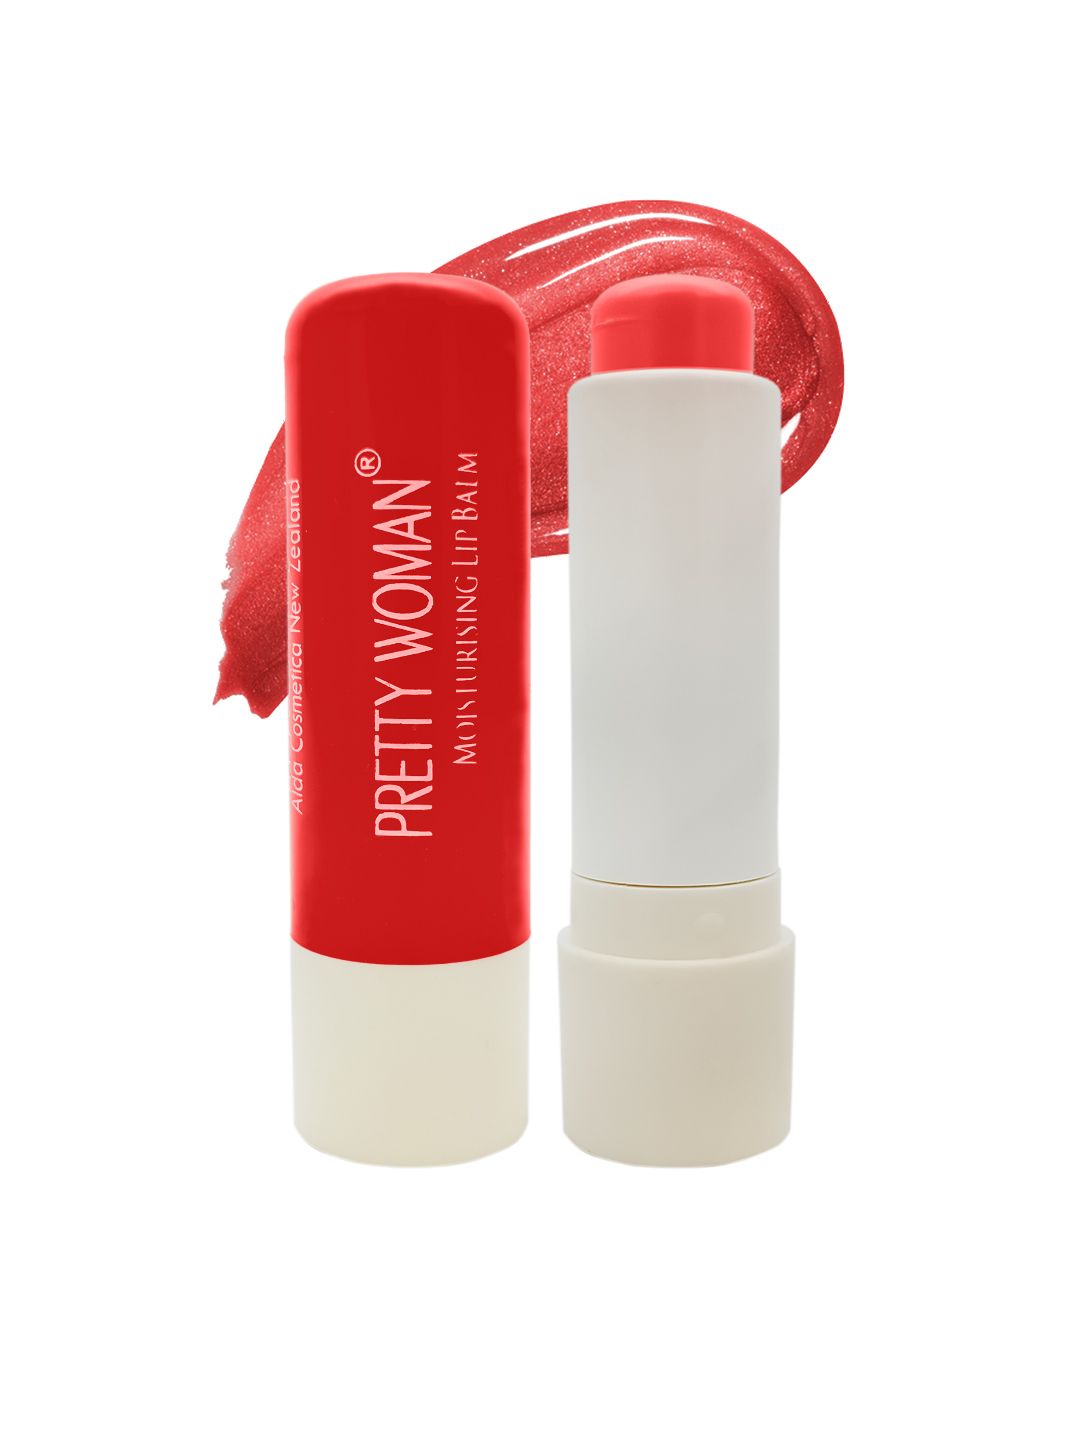 Pretty Woman Moisturizing Strawberry Tinted Lip Balm for Dry & Chapped Lips Price in India